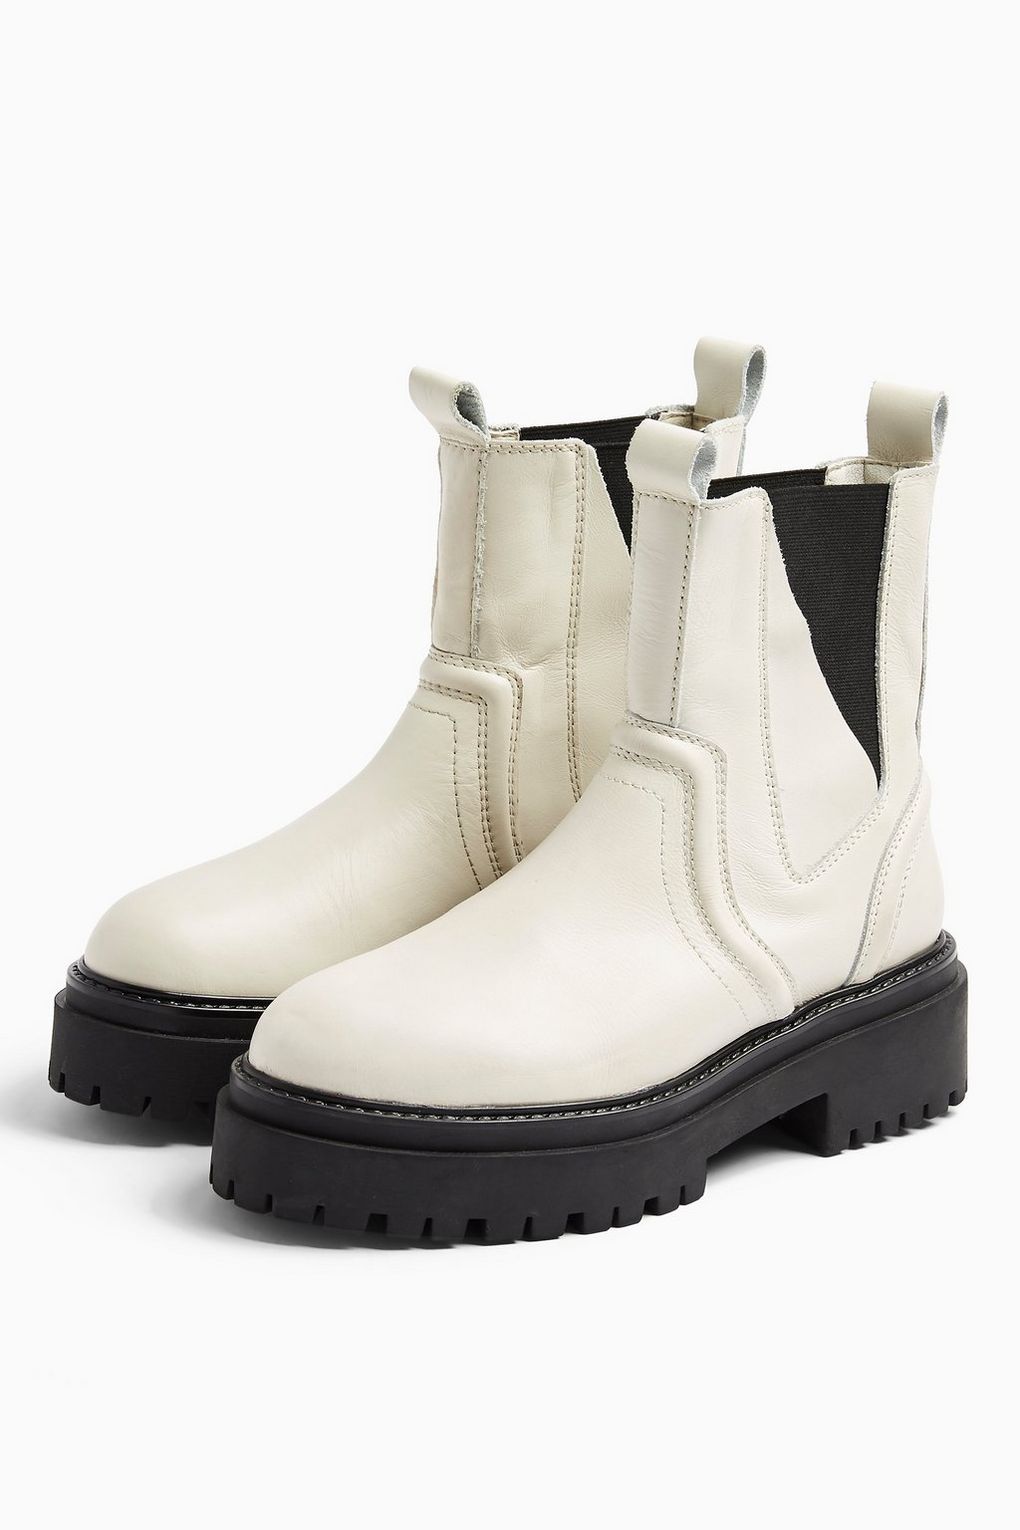 Topshop Ecru Leather Chunky Chelsea Boots